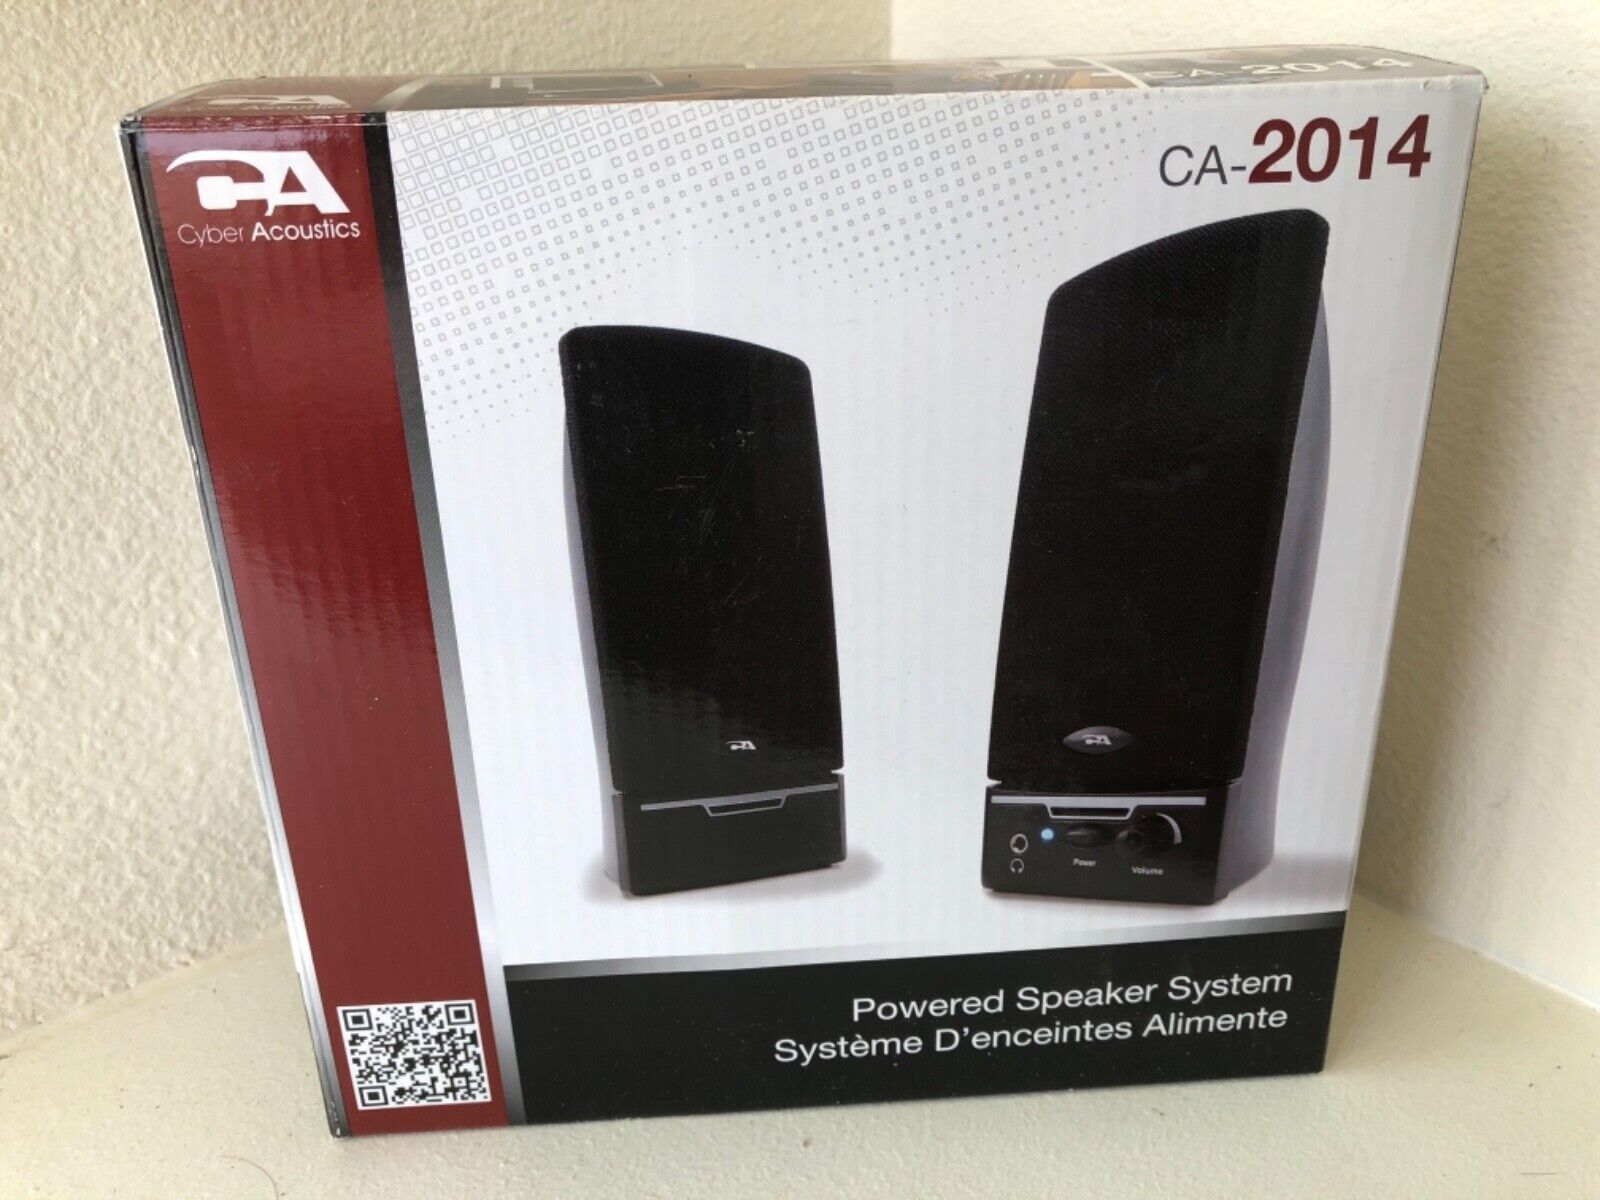 Powered Speaker System by Cyber Acoustics